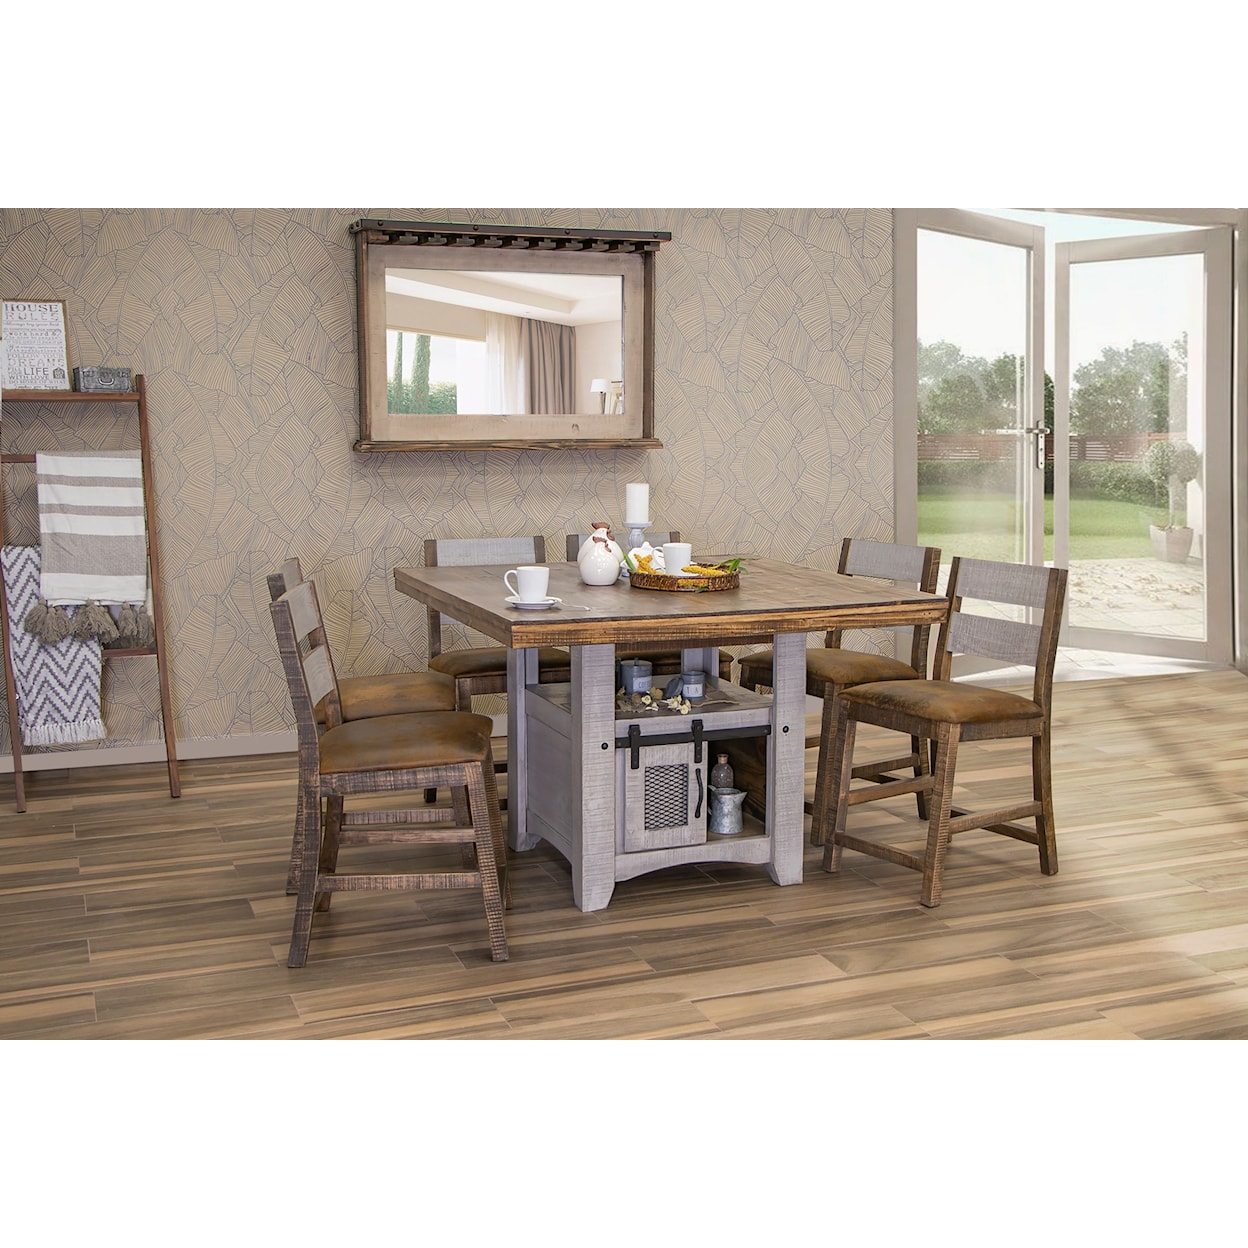 International Furniture Direct Pueblo Counter Height Dining Table